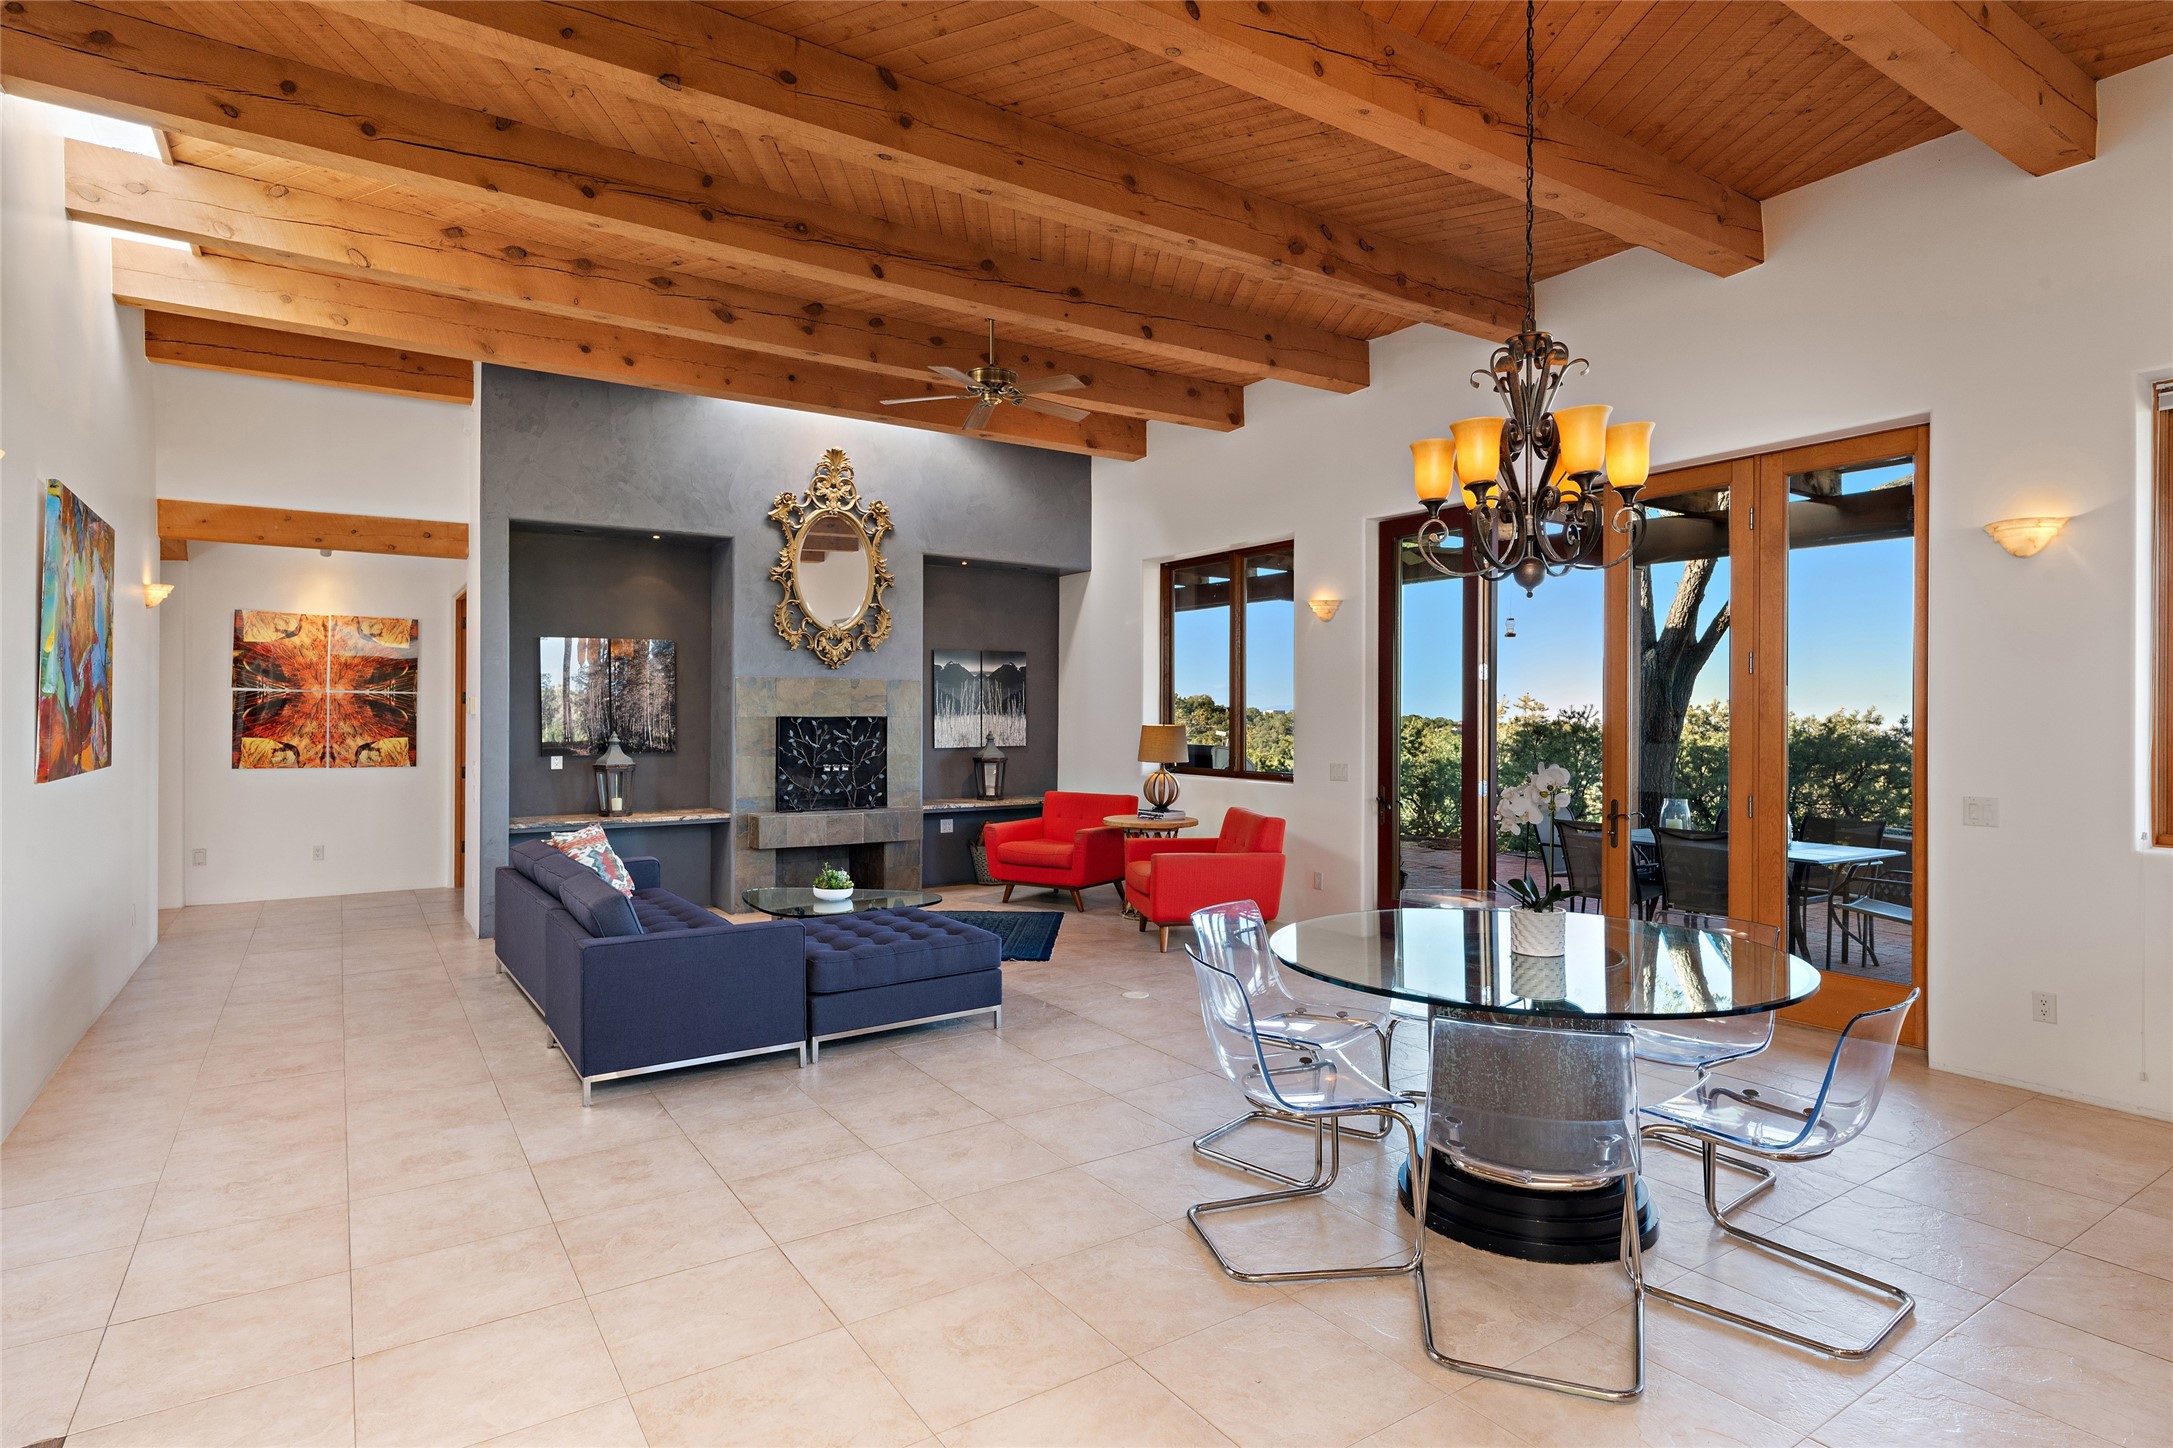 Stepping Into Home, This Living Room/Dining Combination is Breathtaking!